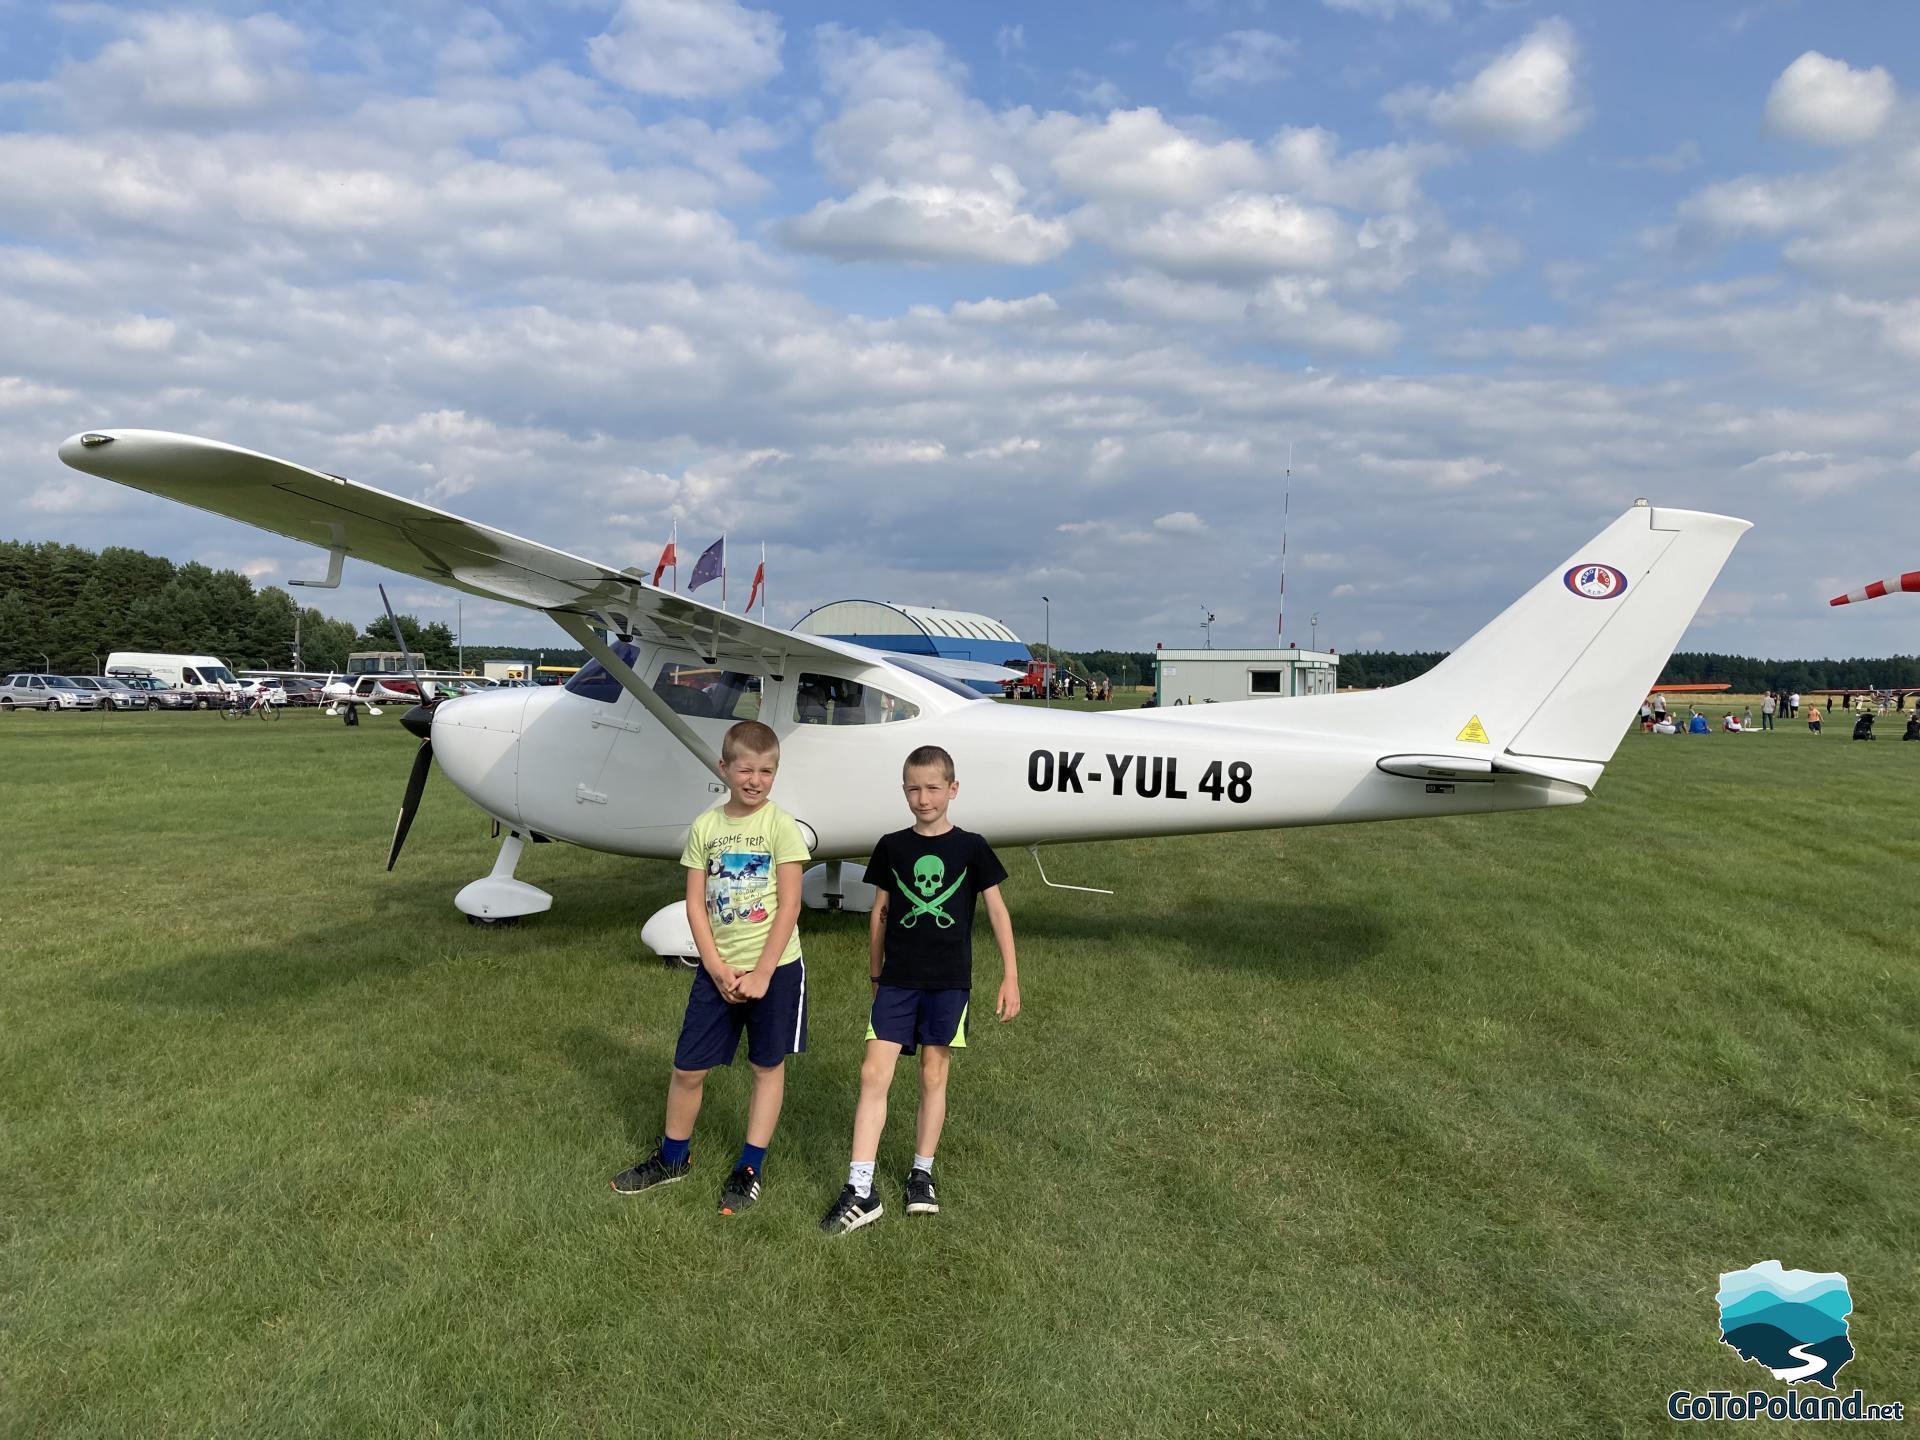 Two boys in front a small plane